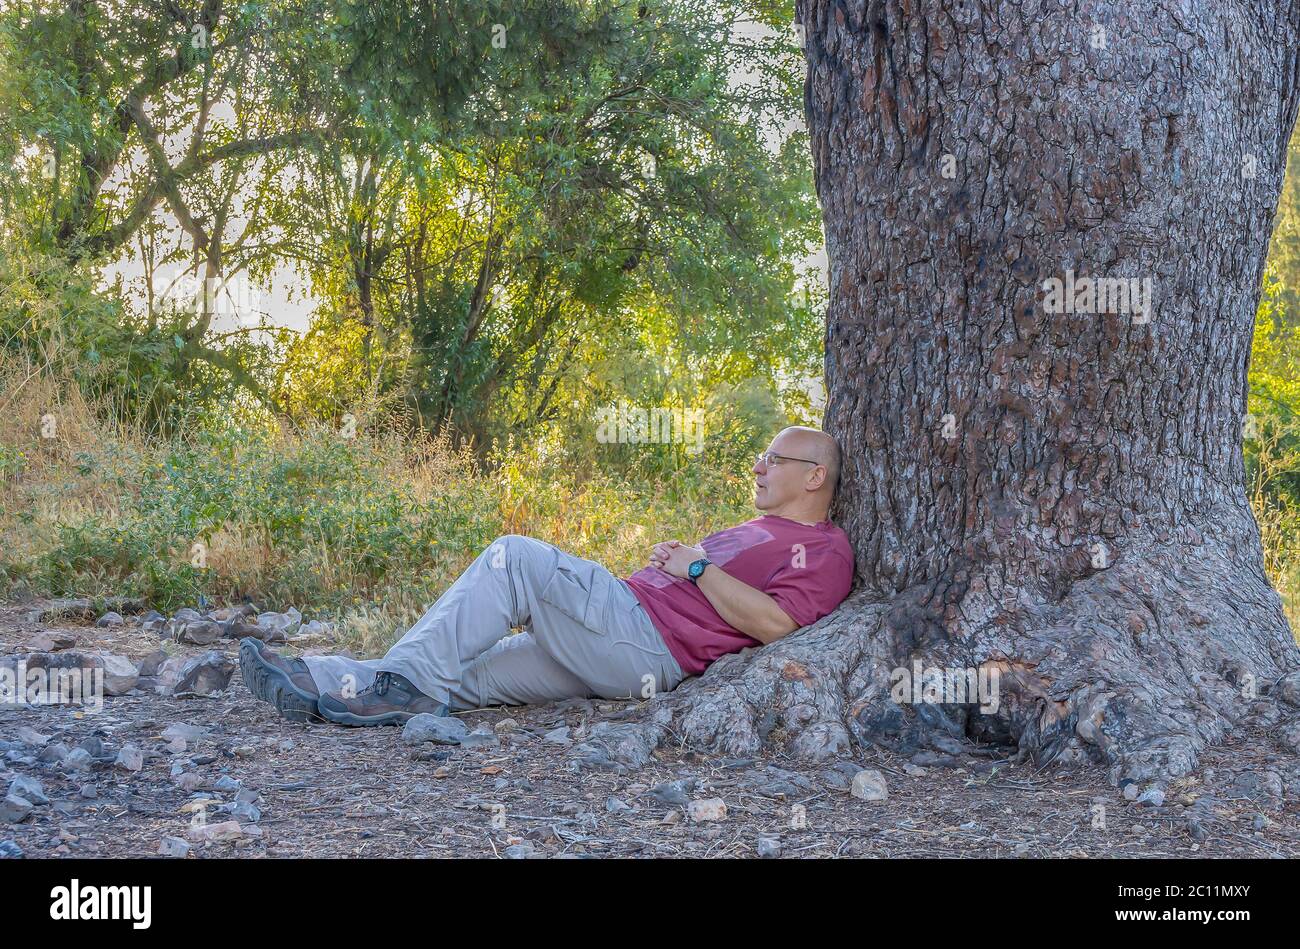 A middle aged man resting outdoors in the shade of an old Jerusalem pine tree Stock Photo